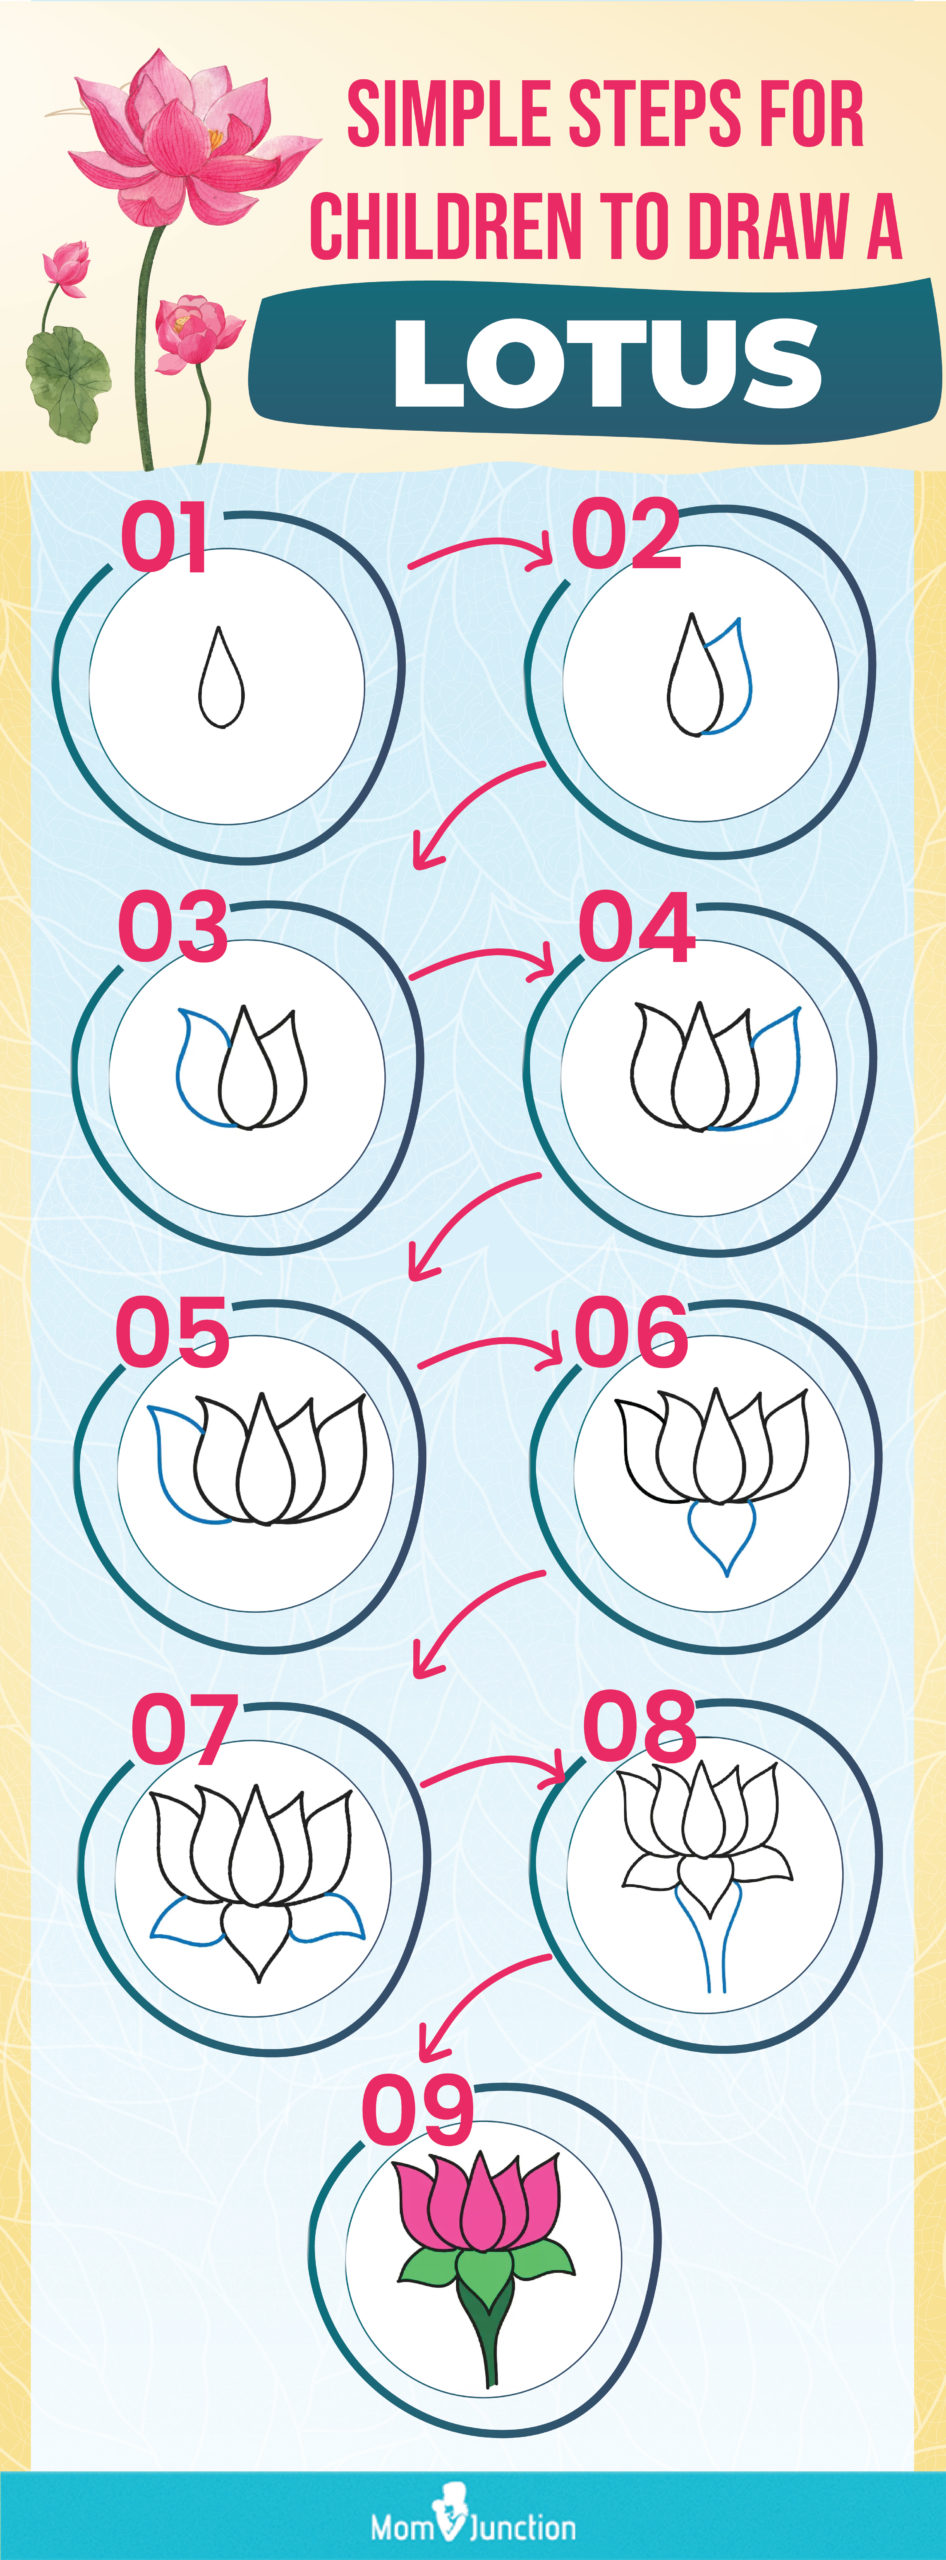 How To Draw A Lotus Flower - Art For Kids Hub -